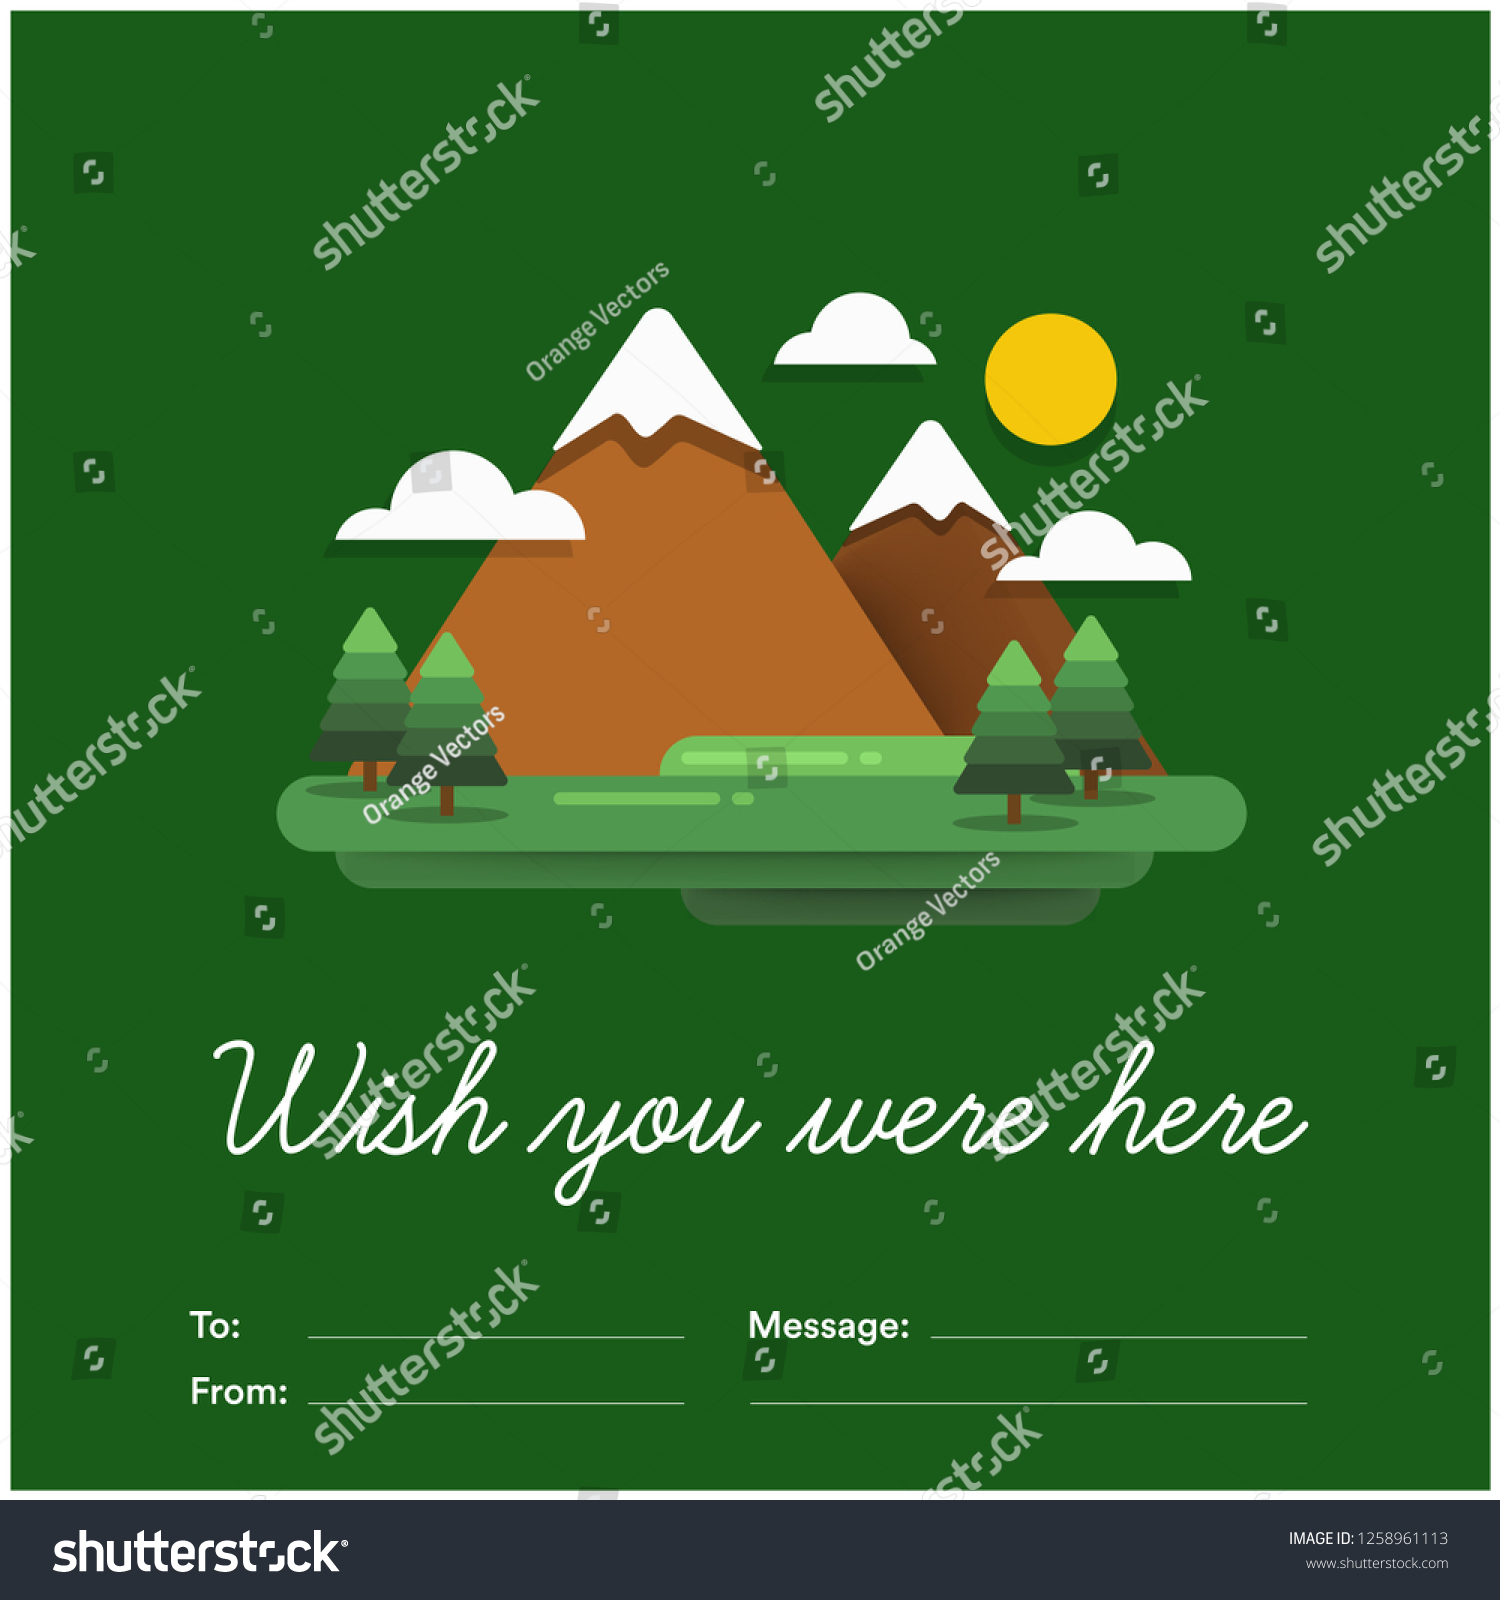 Wish You Were Here Mountain Illustration Card with To and From Details  #1258961113